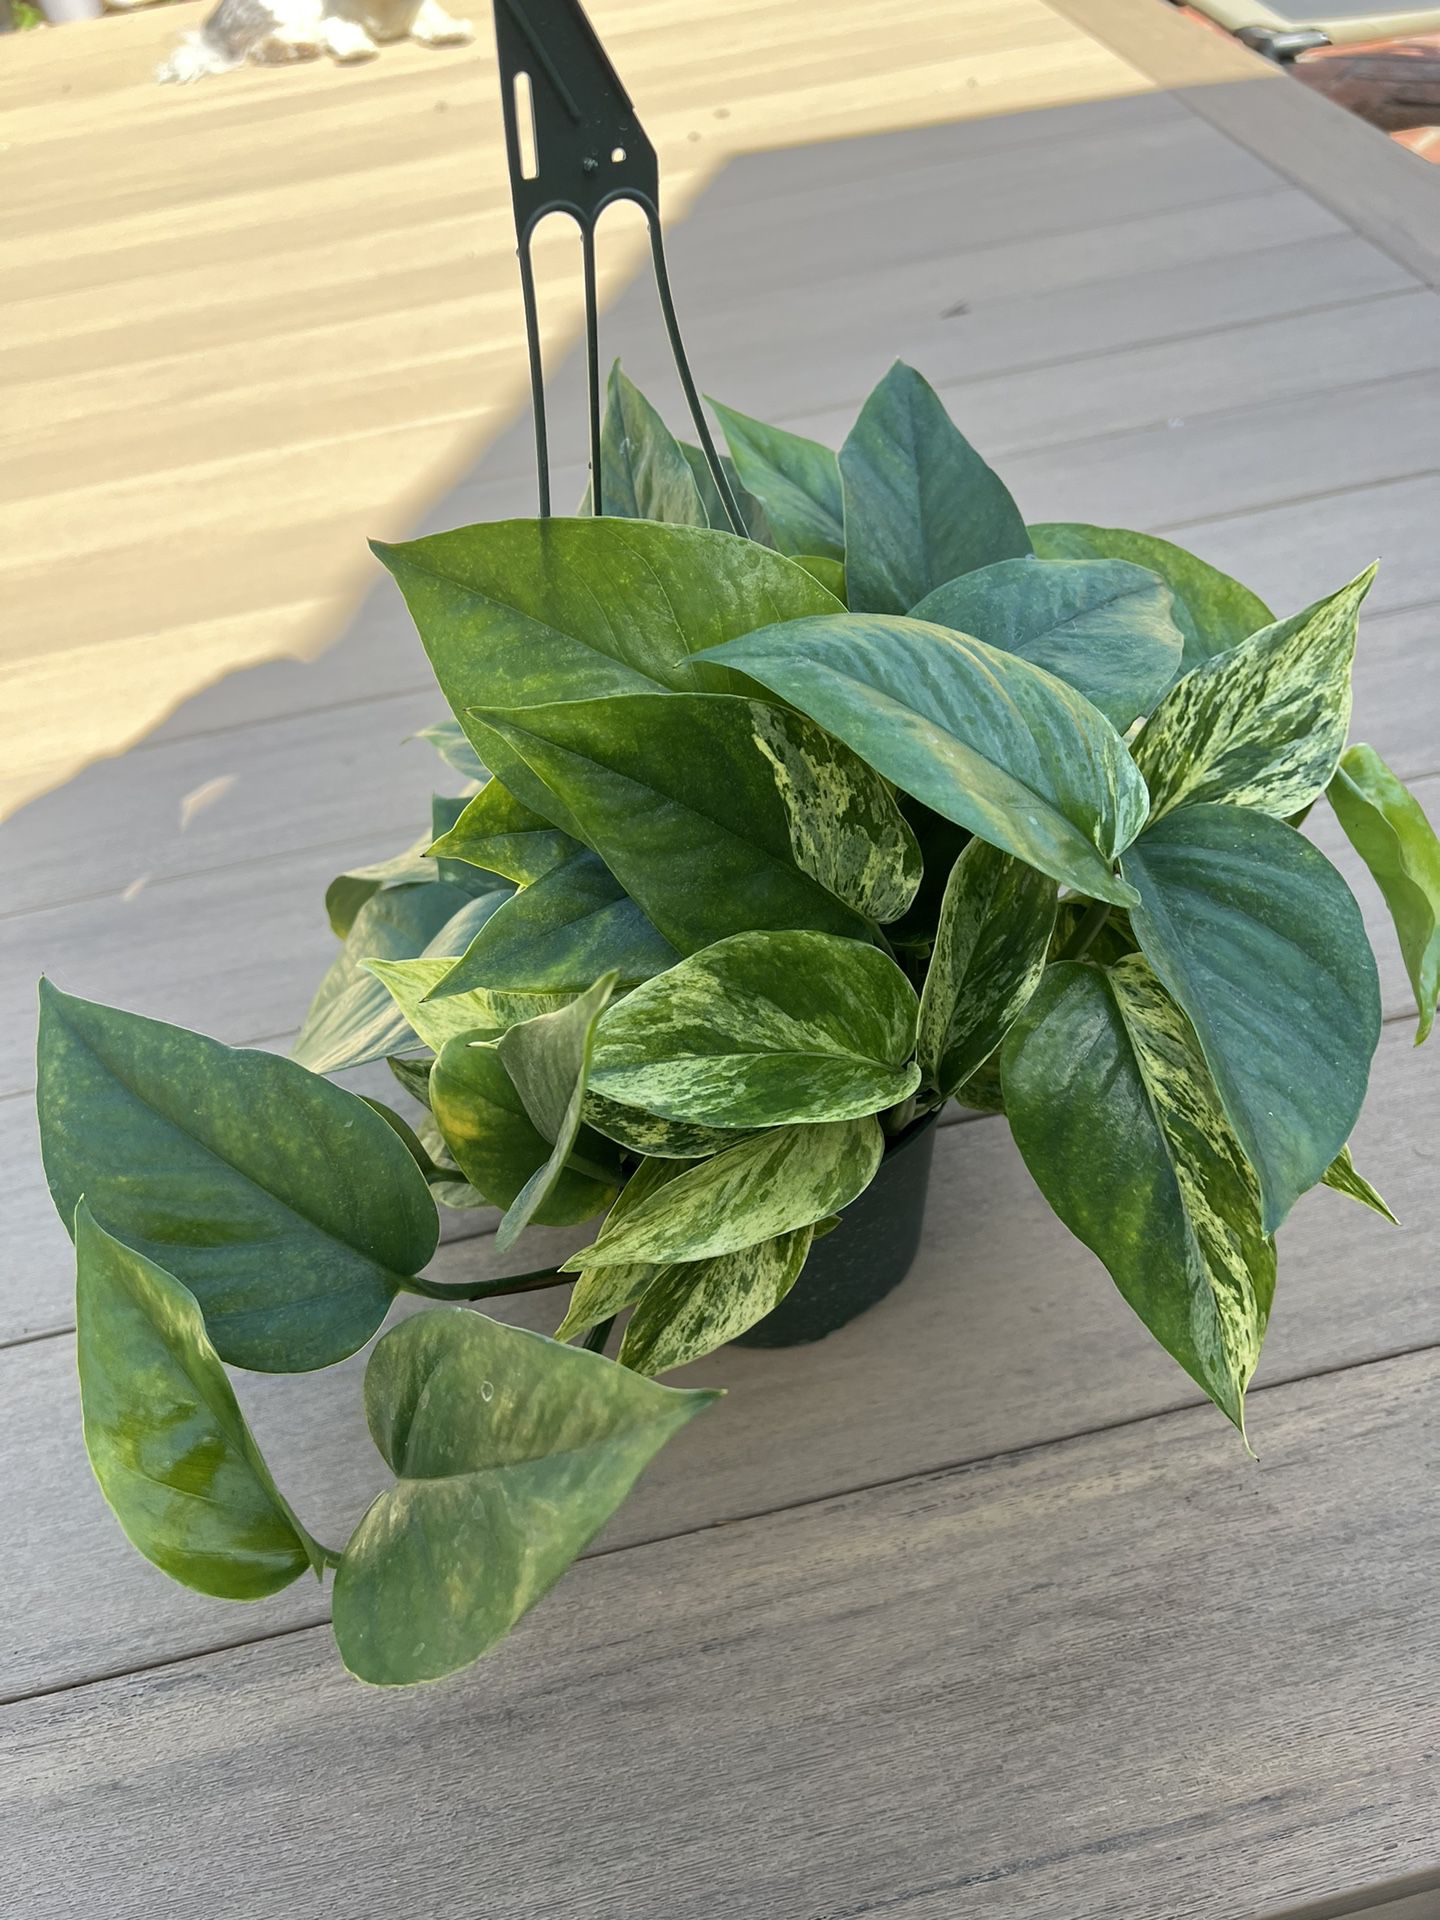 Marble queen & golden pothos mix, live plant comes in a 6” nursery pot. ☑️ profile for more plants